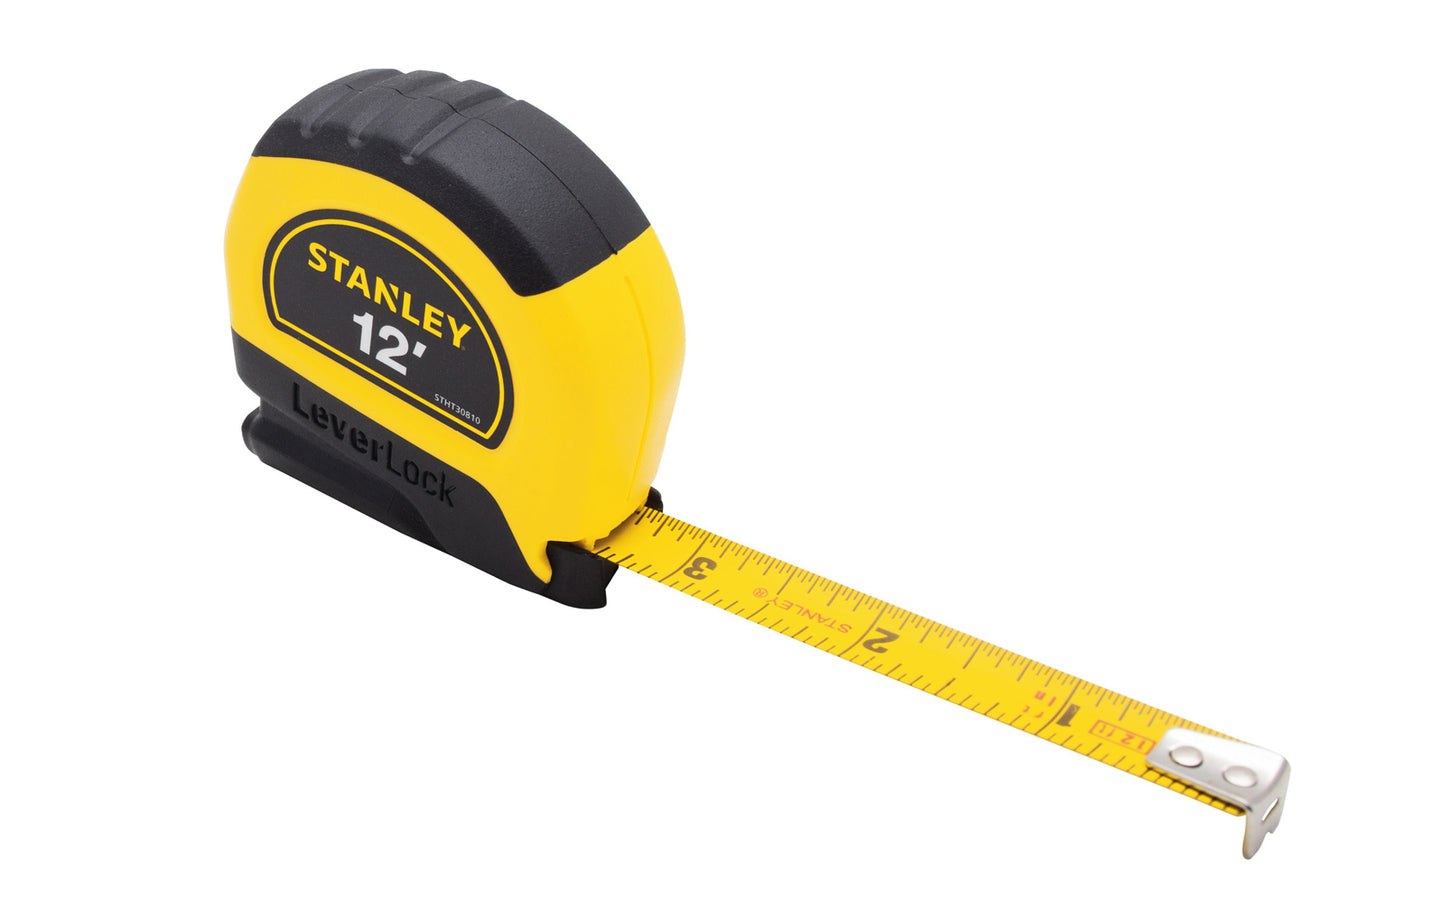 Model STHT30810 · Stanley Tools Leverlock model tape measure - Blade locks automatically. 12' long. 1/2" wide blade - Non-glare blade. Easy to read, comfortable to hold, & built to last, this tape measure is a versatile for all your jobs. The tape measure has a squeeze bottom lever to retract the blade. 076174308105